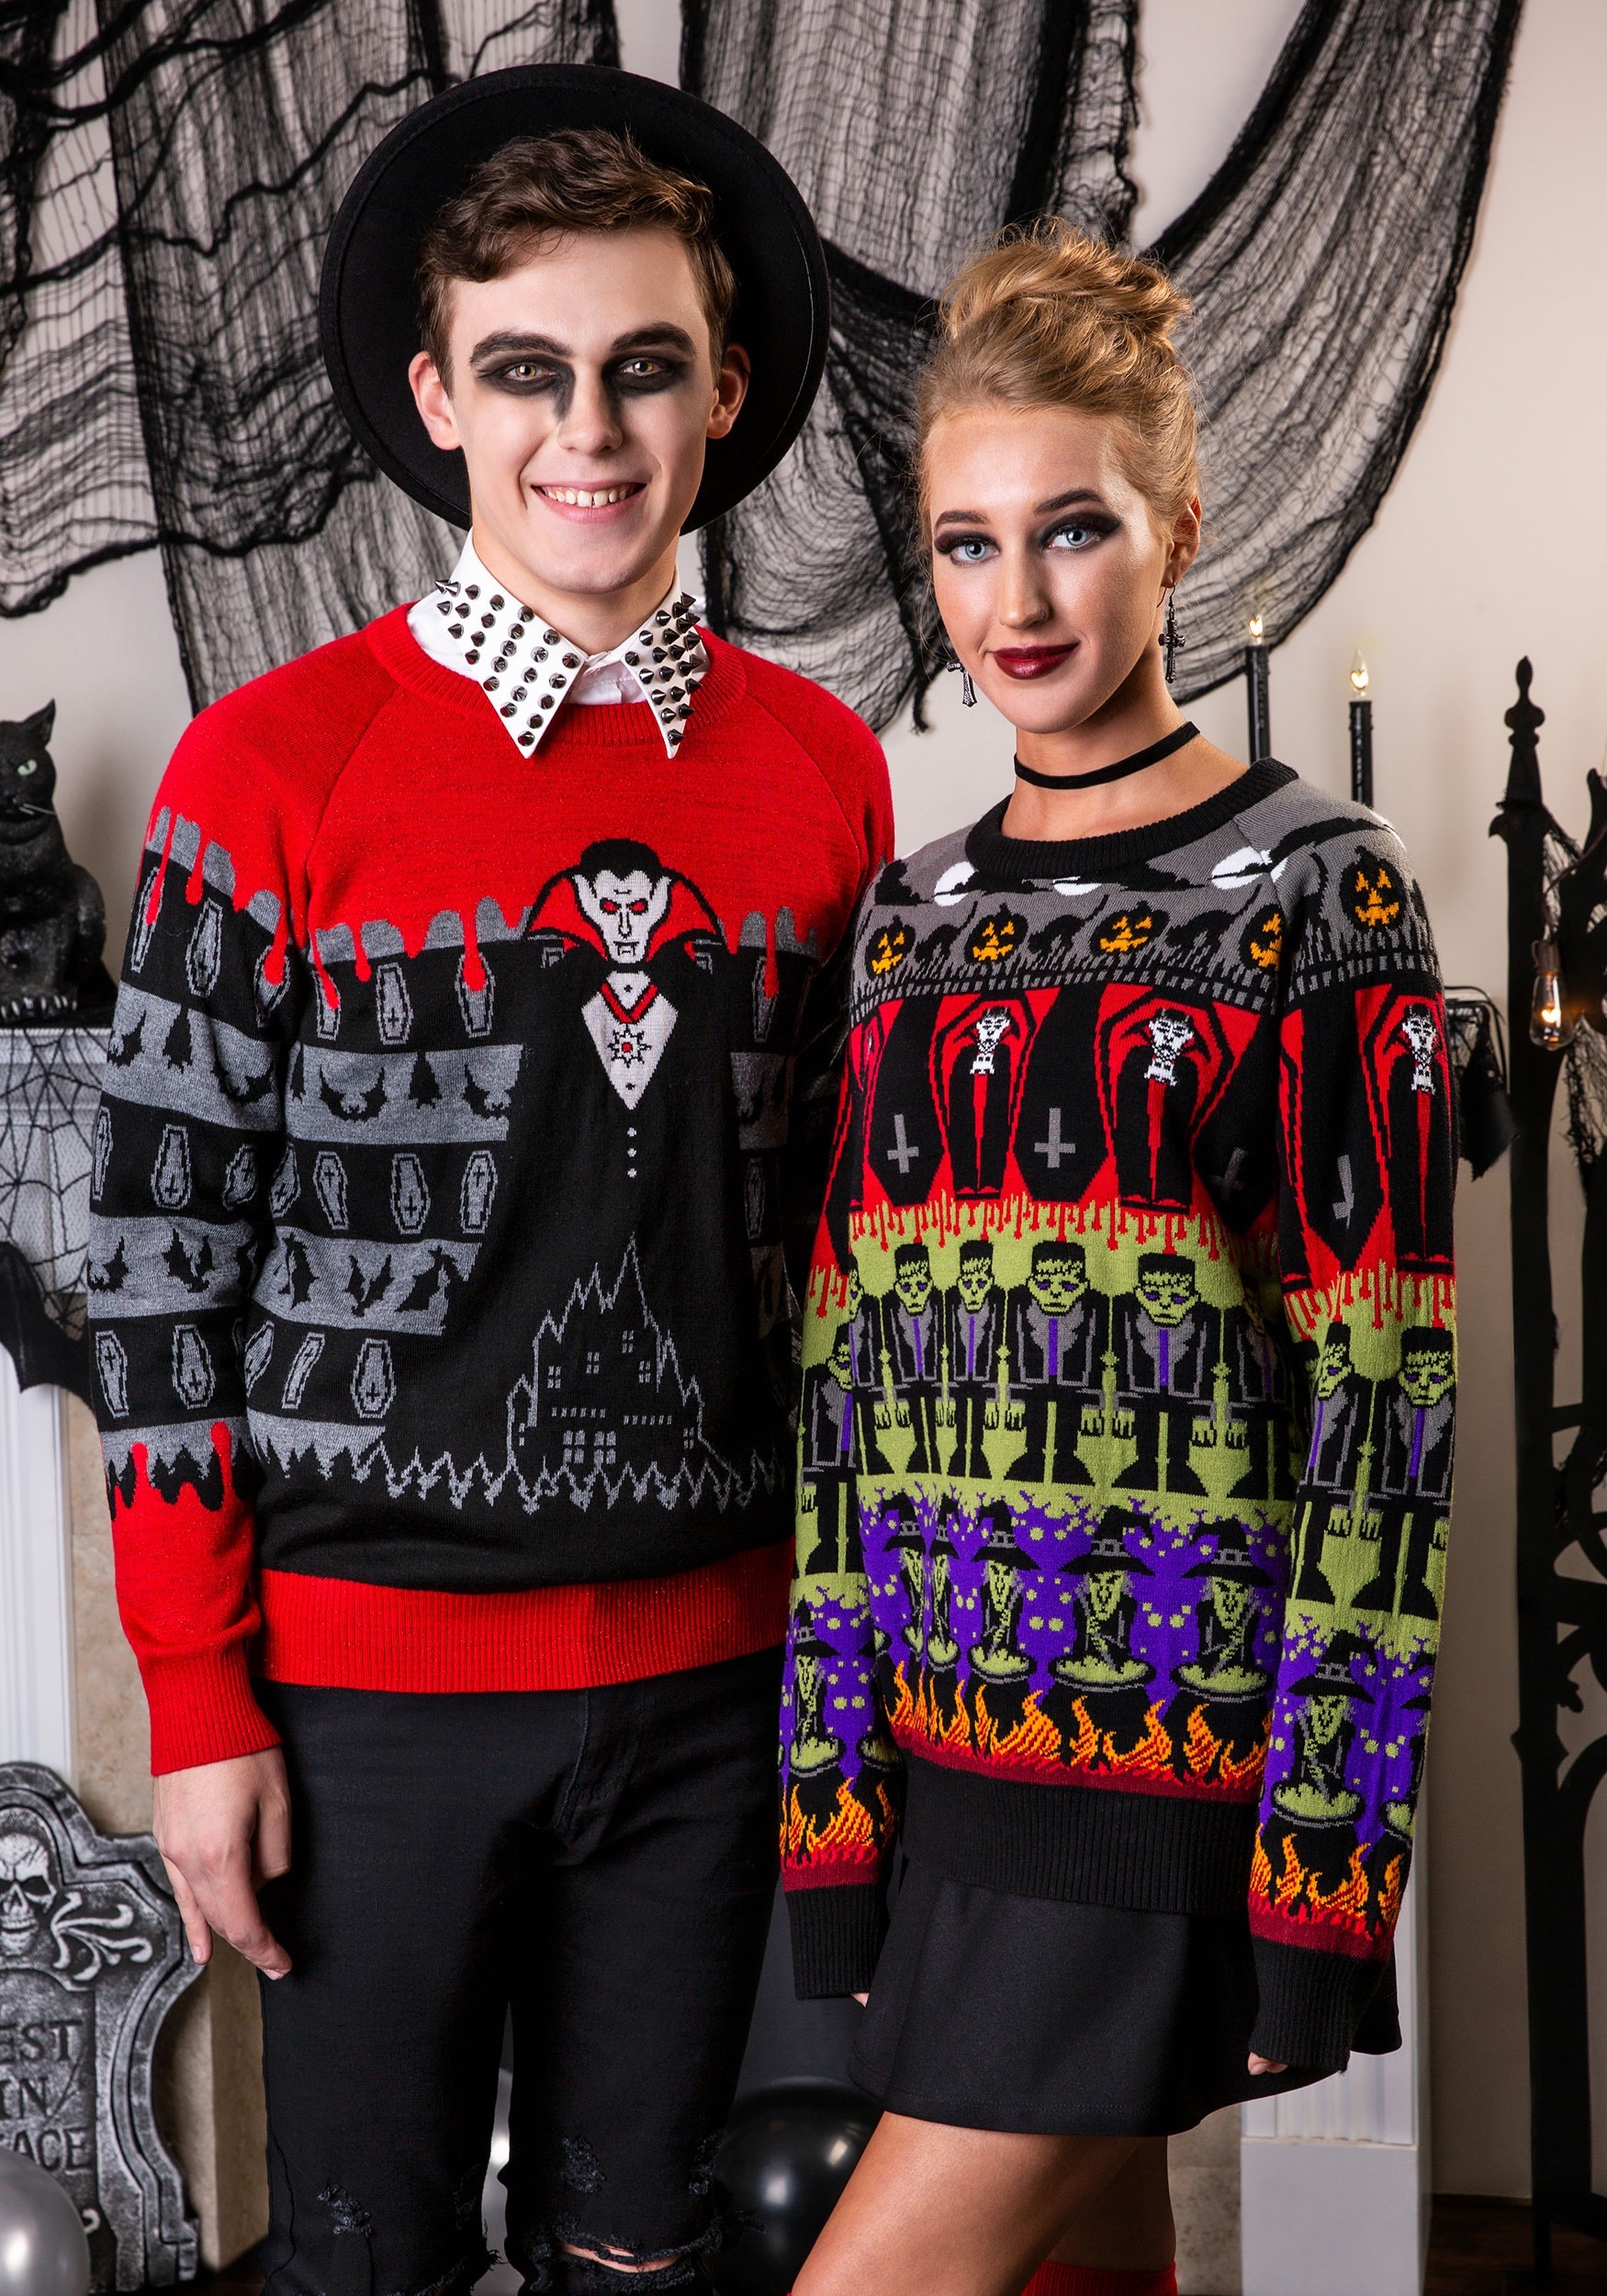 Adult Classic Horror Monsters Fair Isle Ugly Halloween Sweater